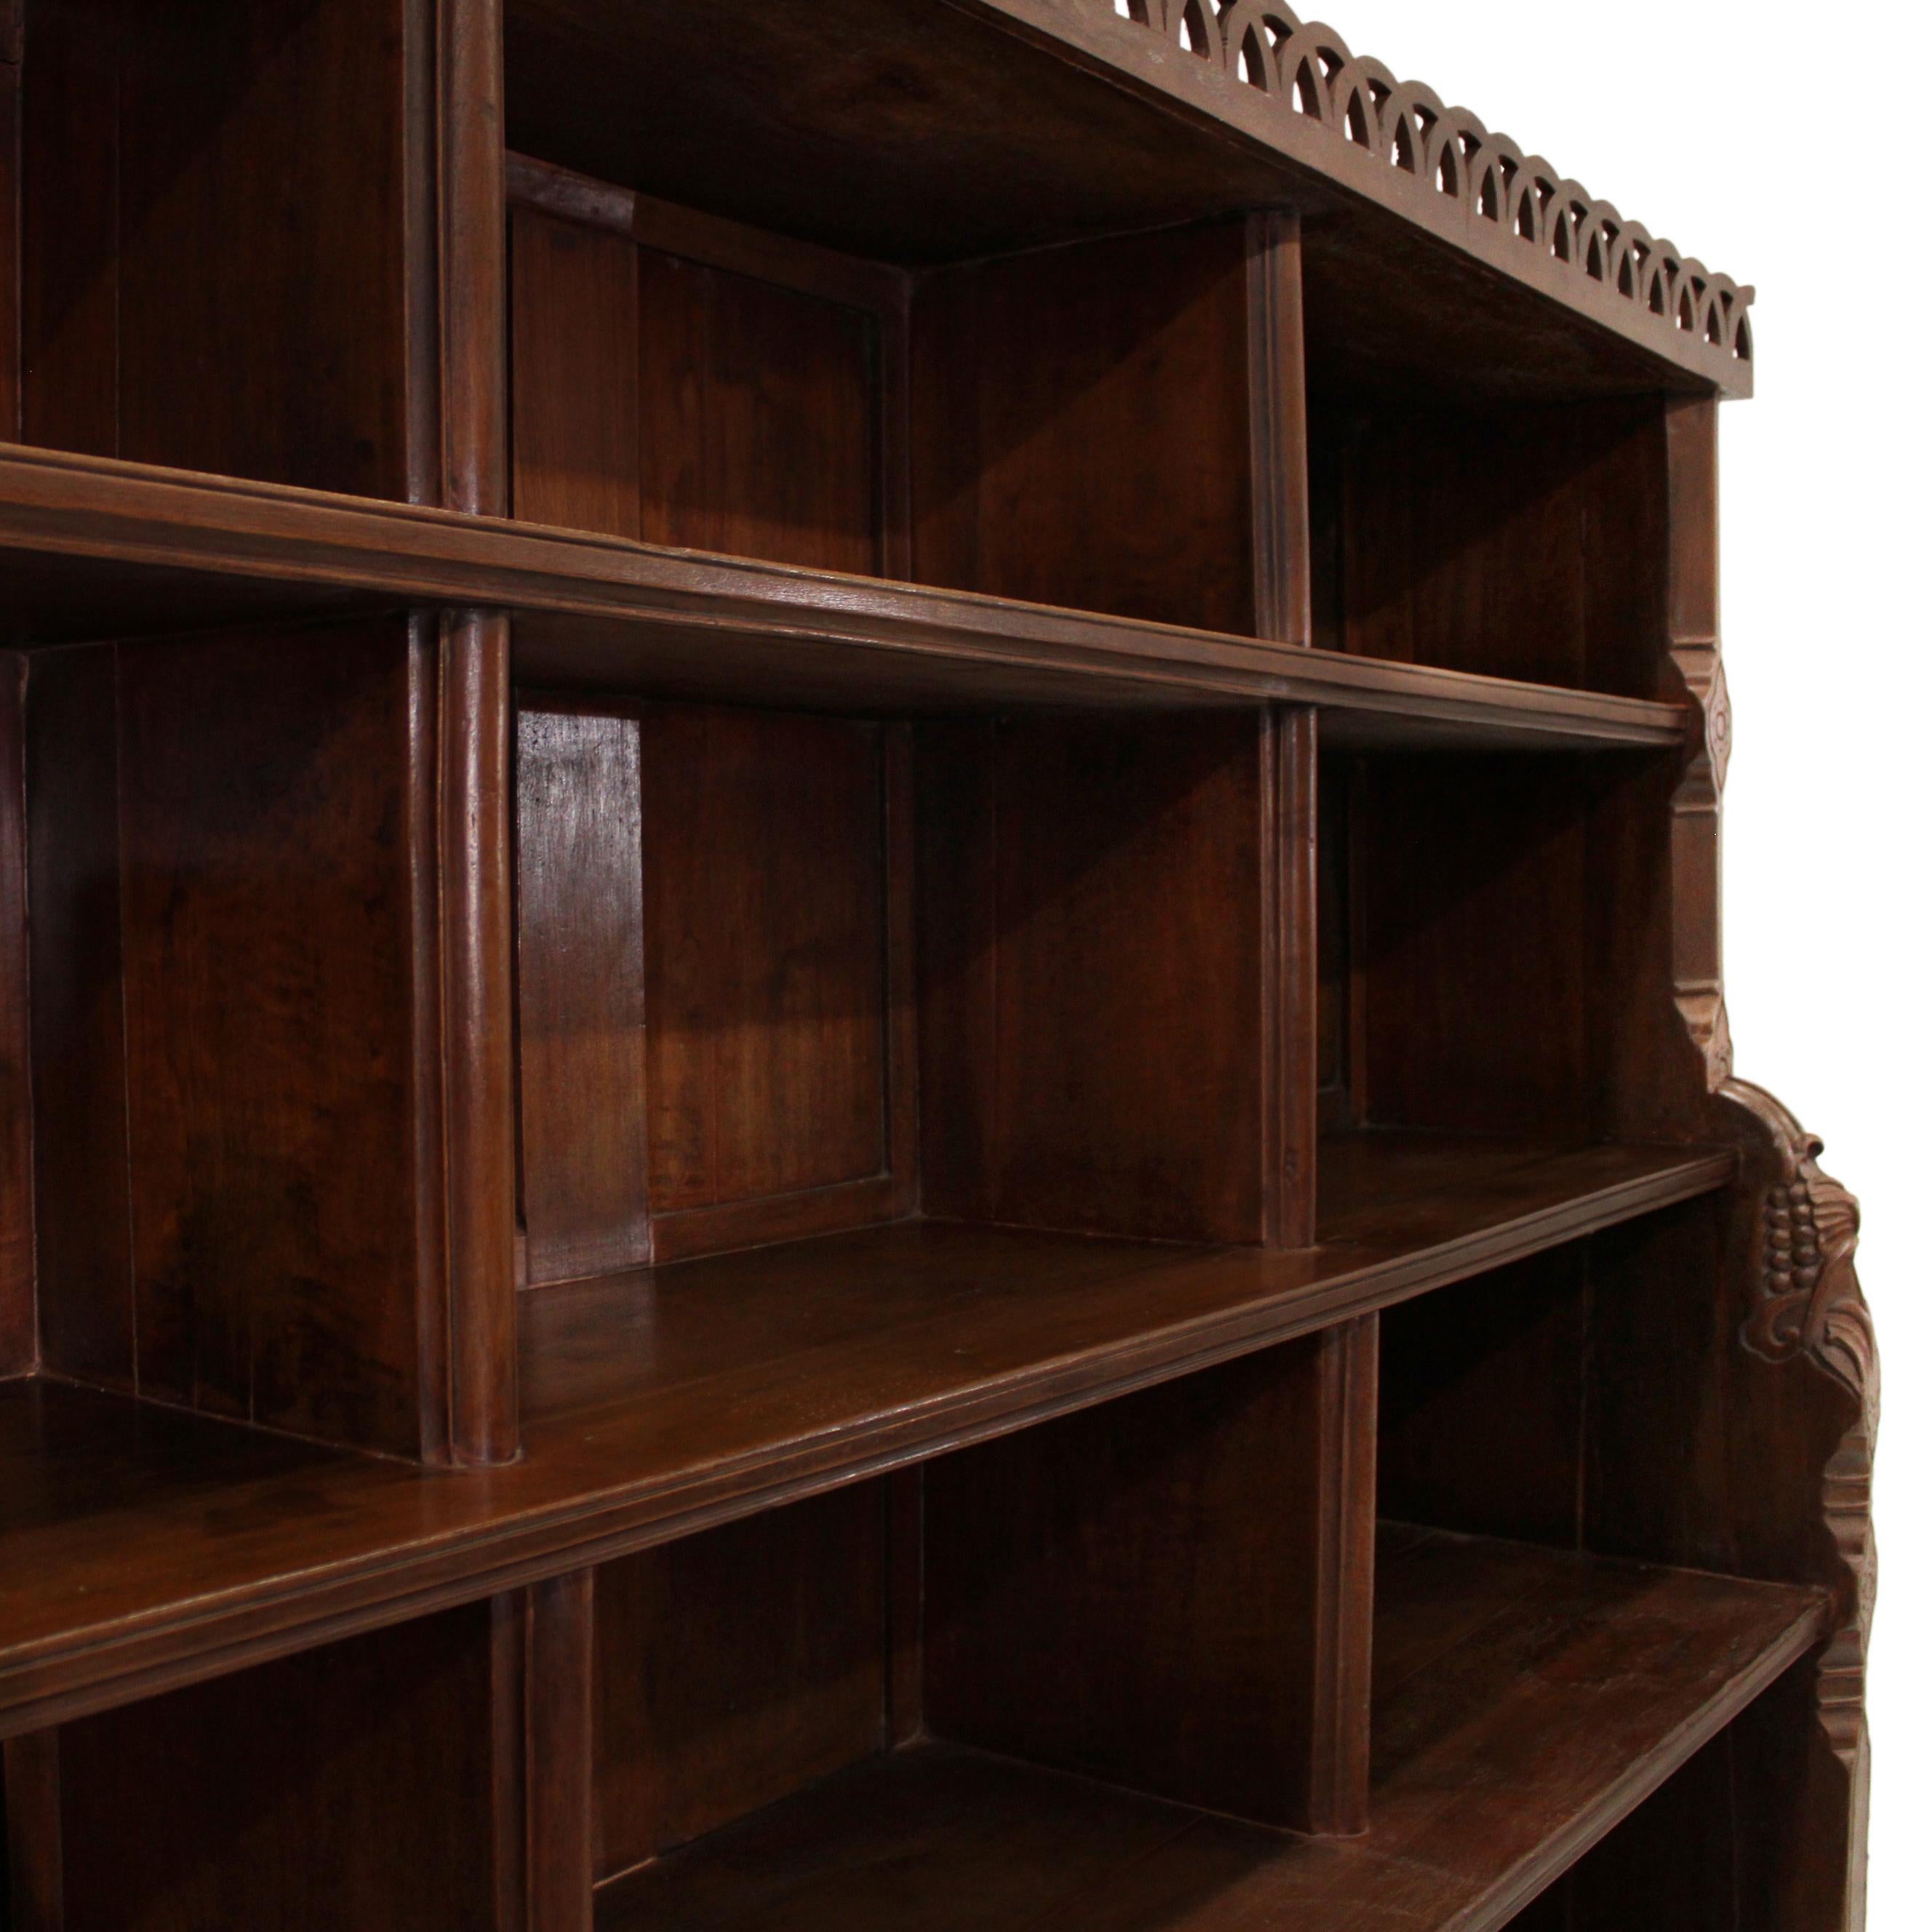 Teak Bookcase From an Indian Palace 5